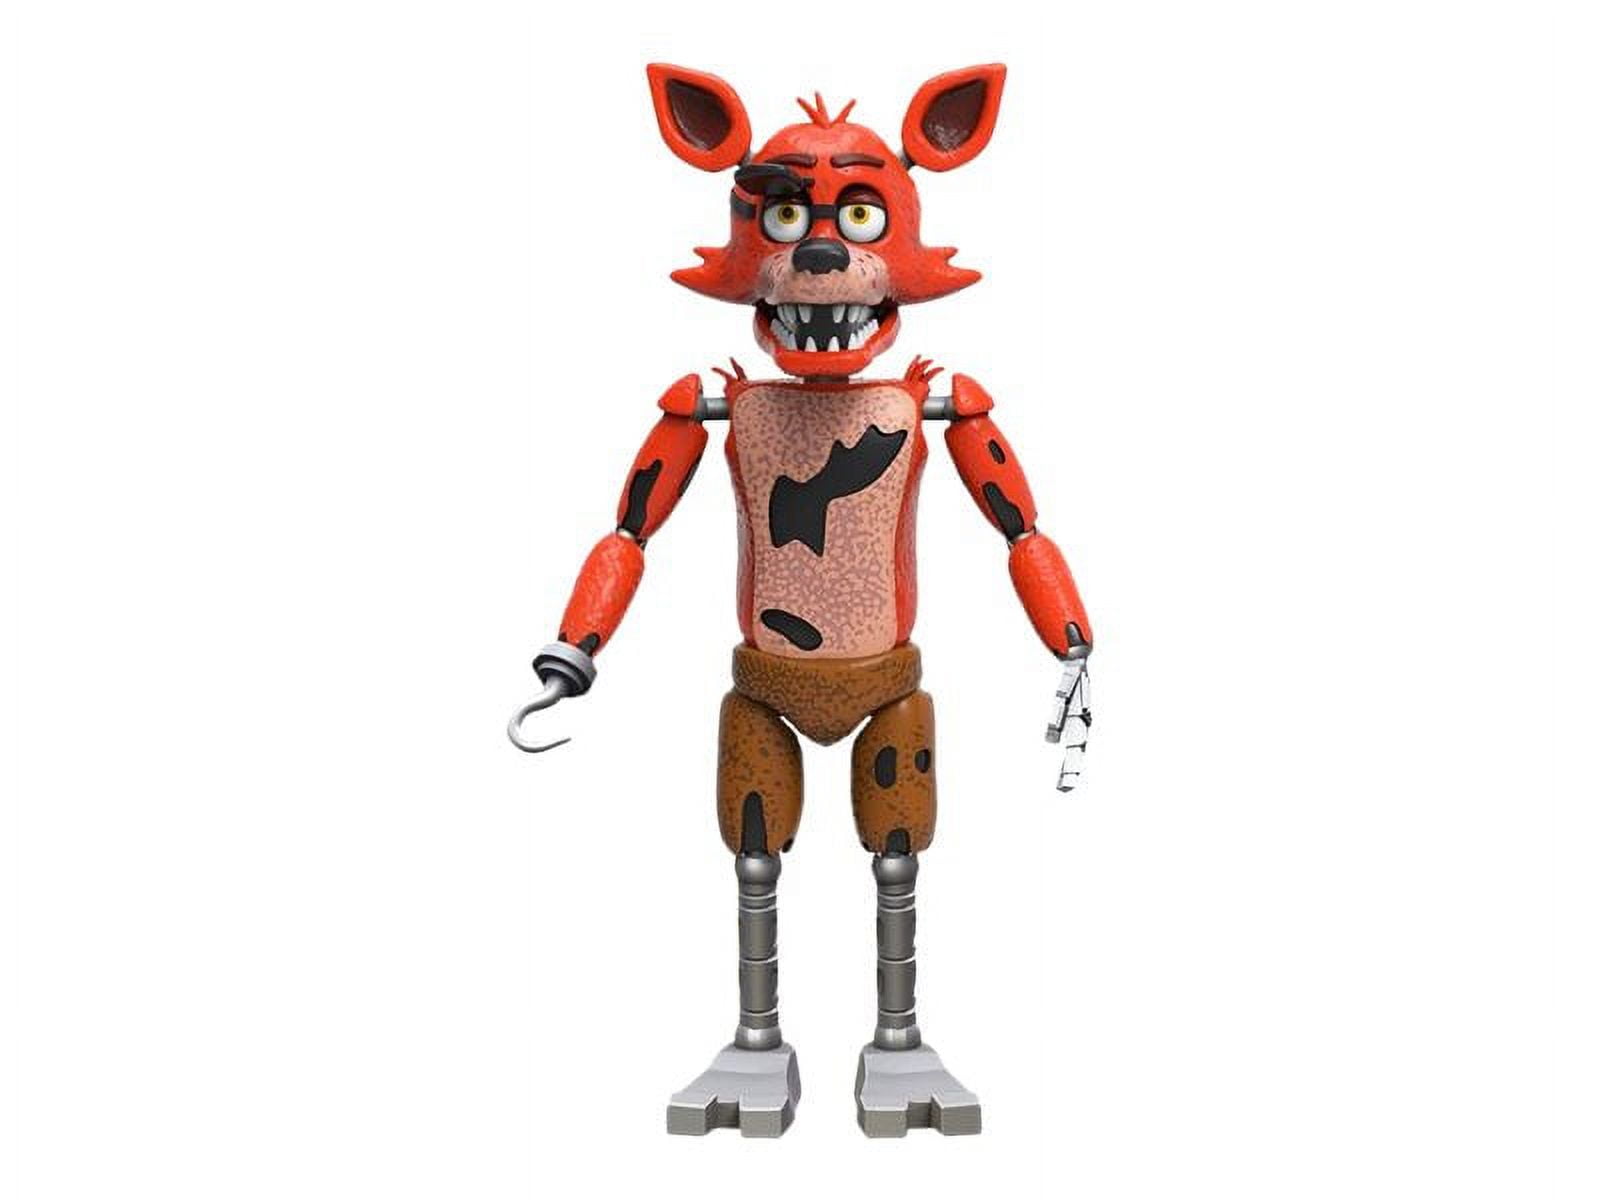 FNAF Foxy lore, versions, and appearances